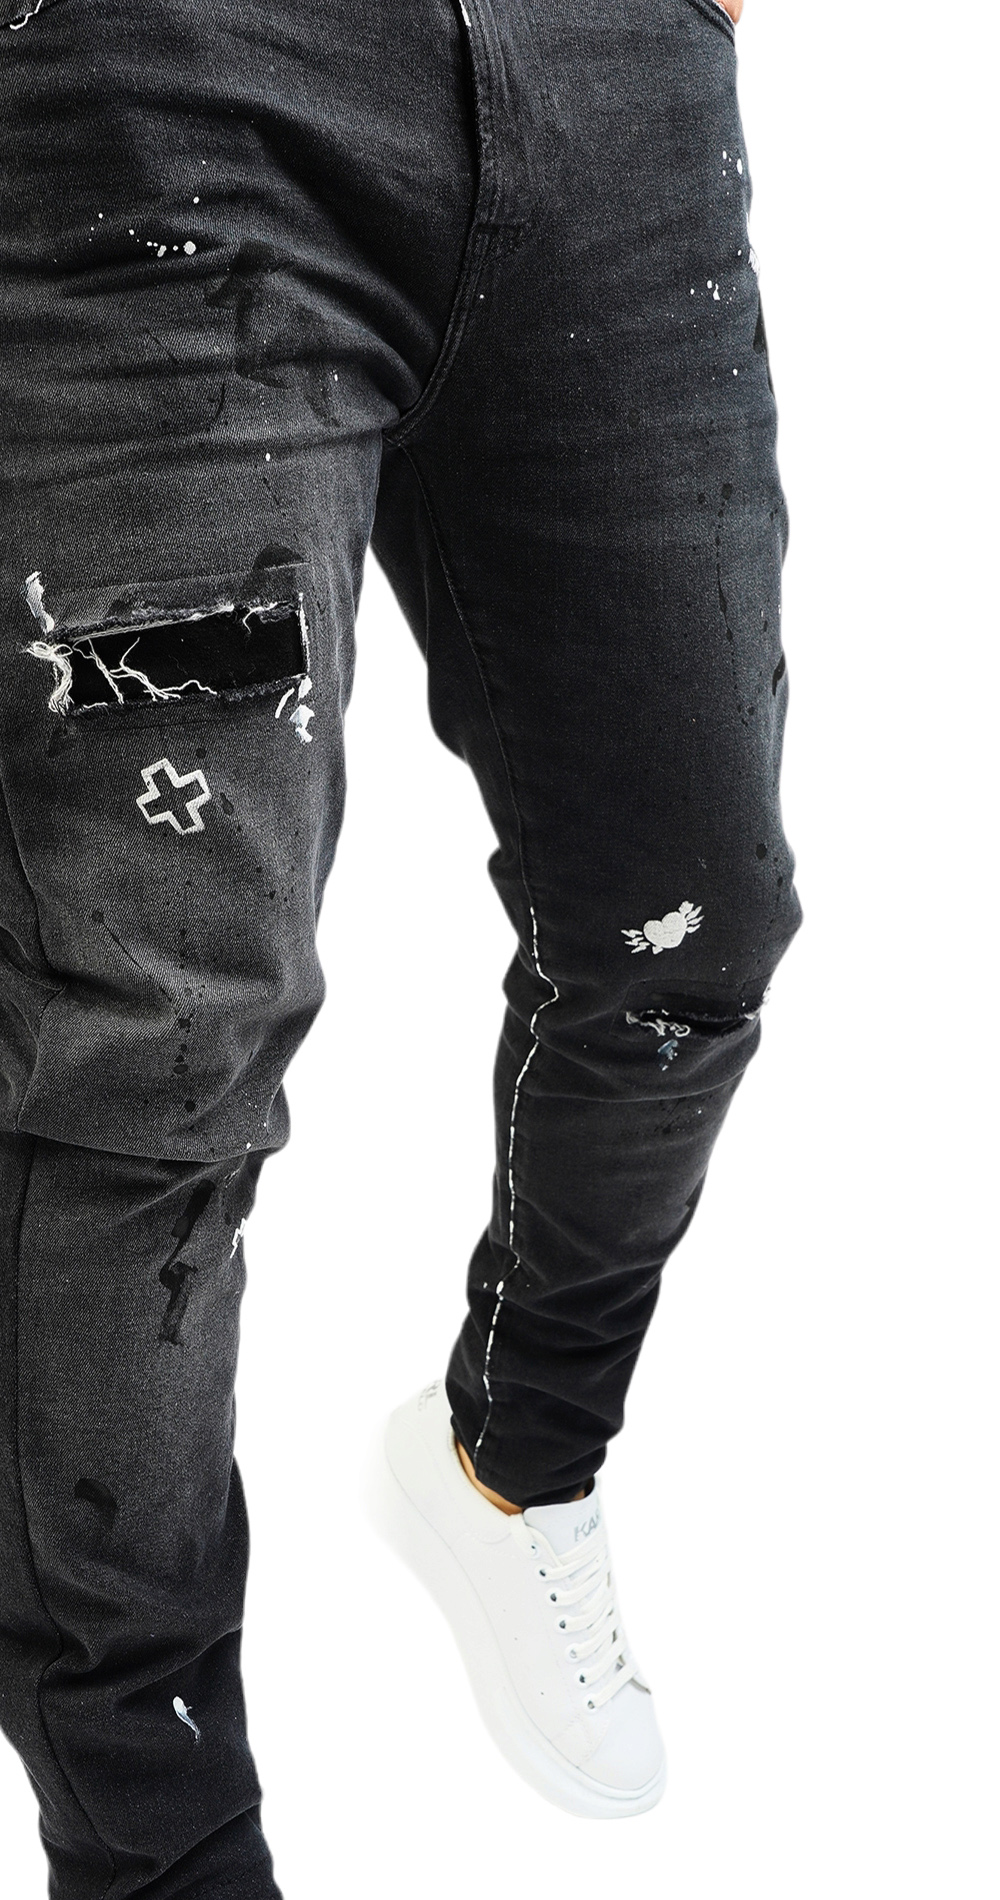 To tell the truth Neighborhood famine Jeans – Custom Fit